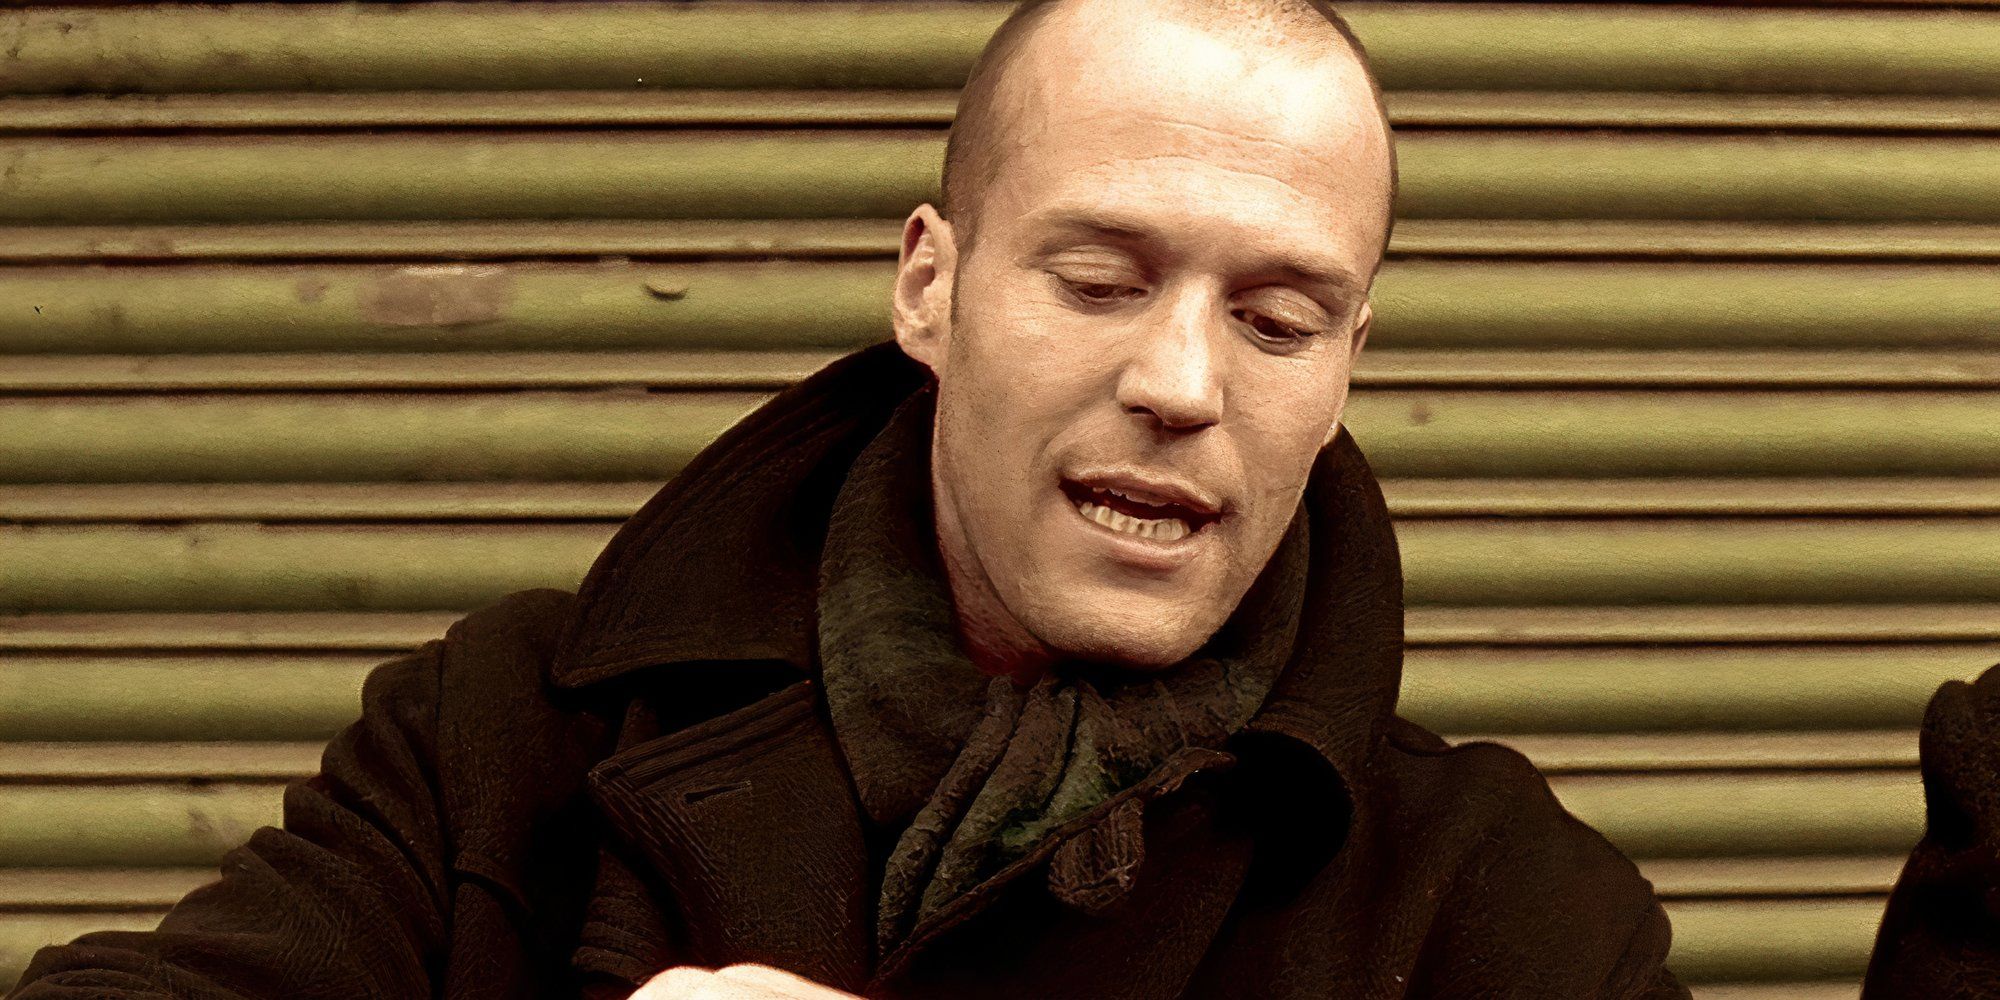 Jason Statham as Bacon in Lock, Stock and Two Smoking Barrels talking.